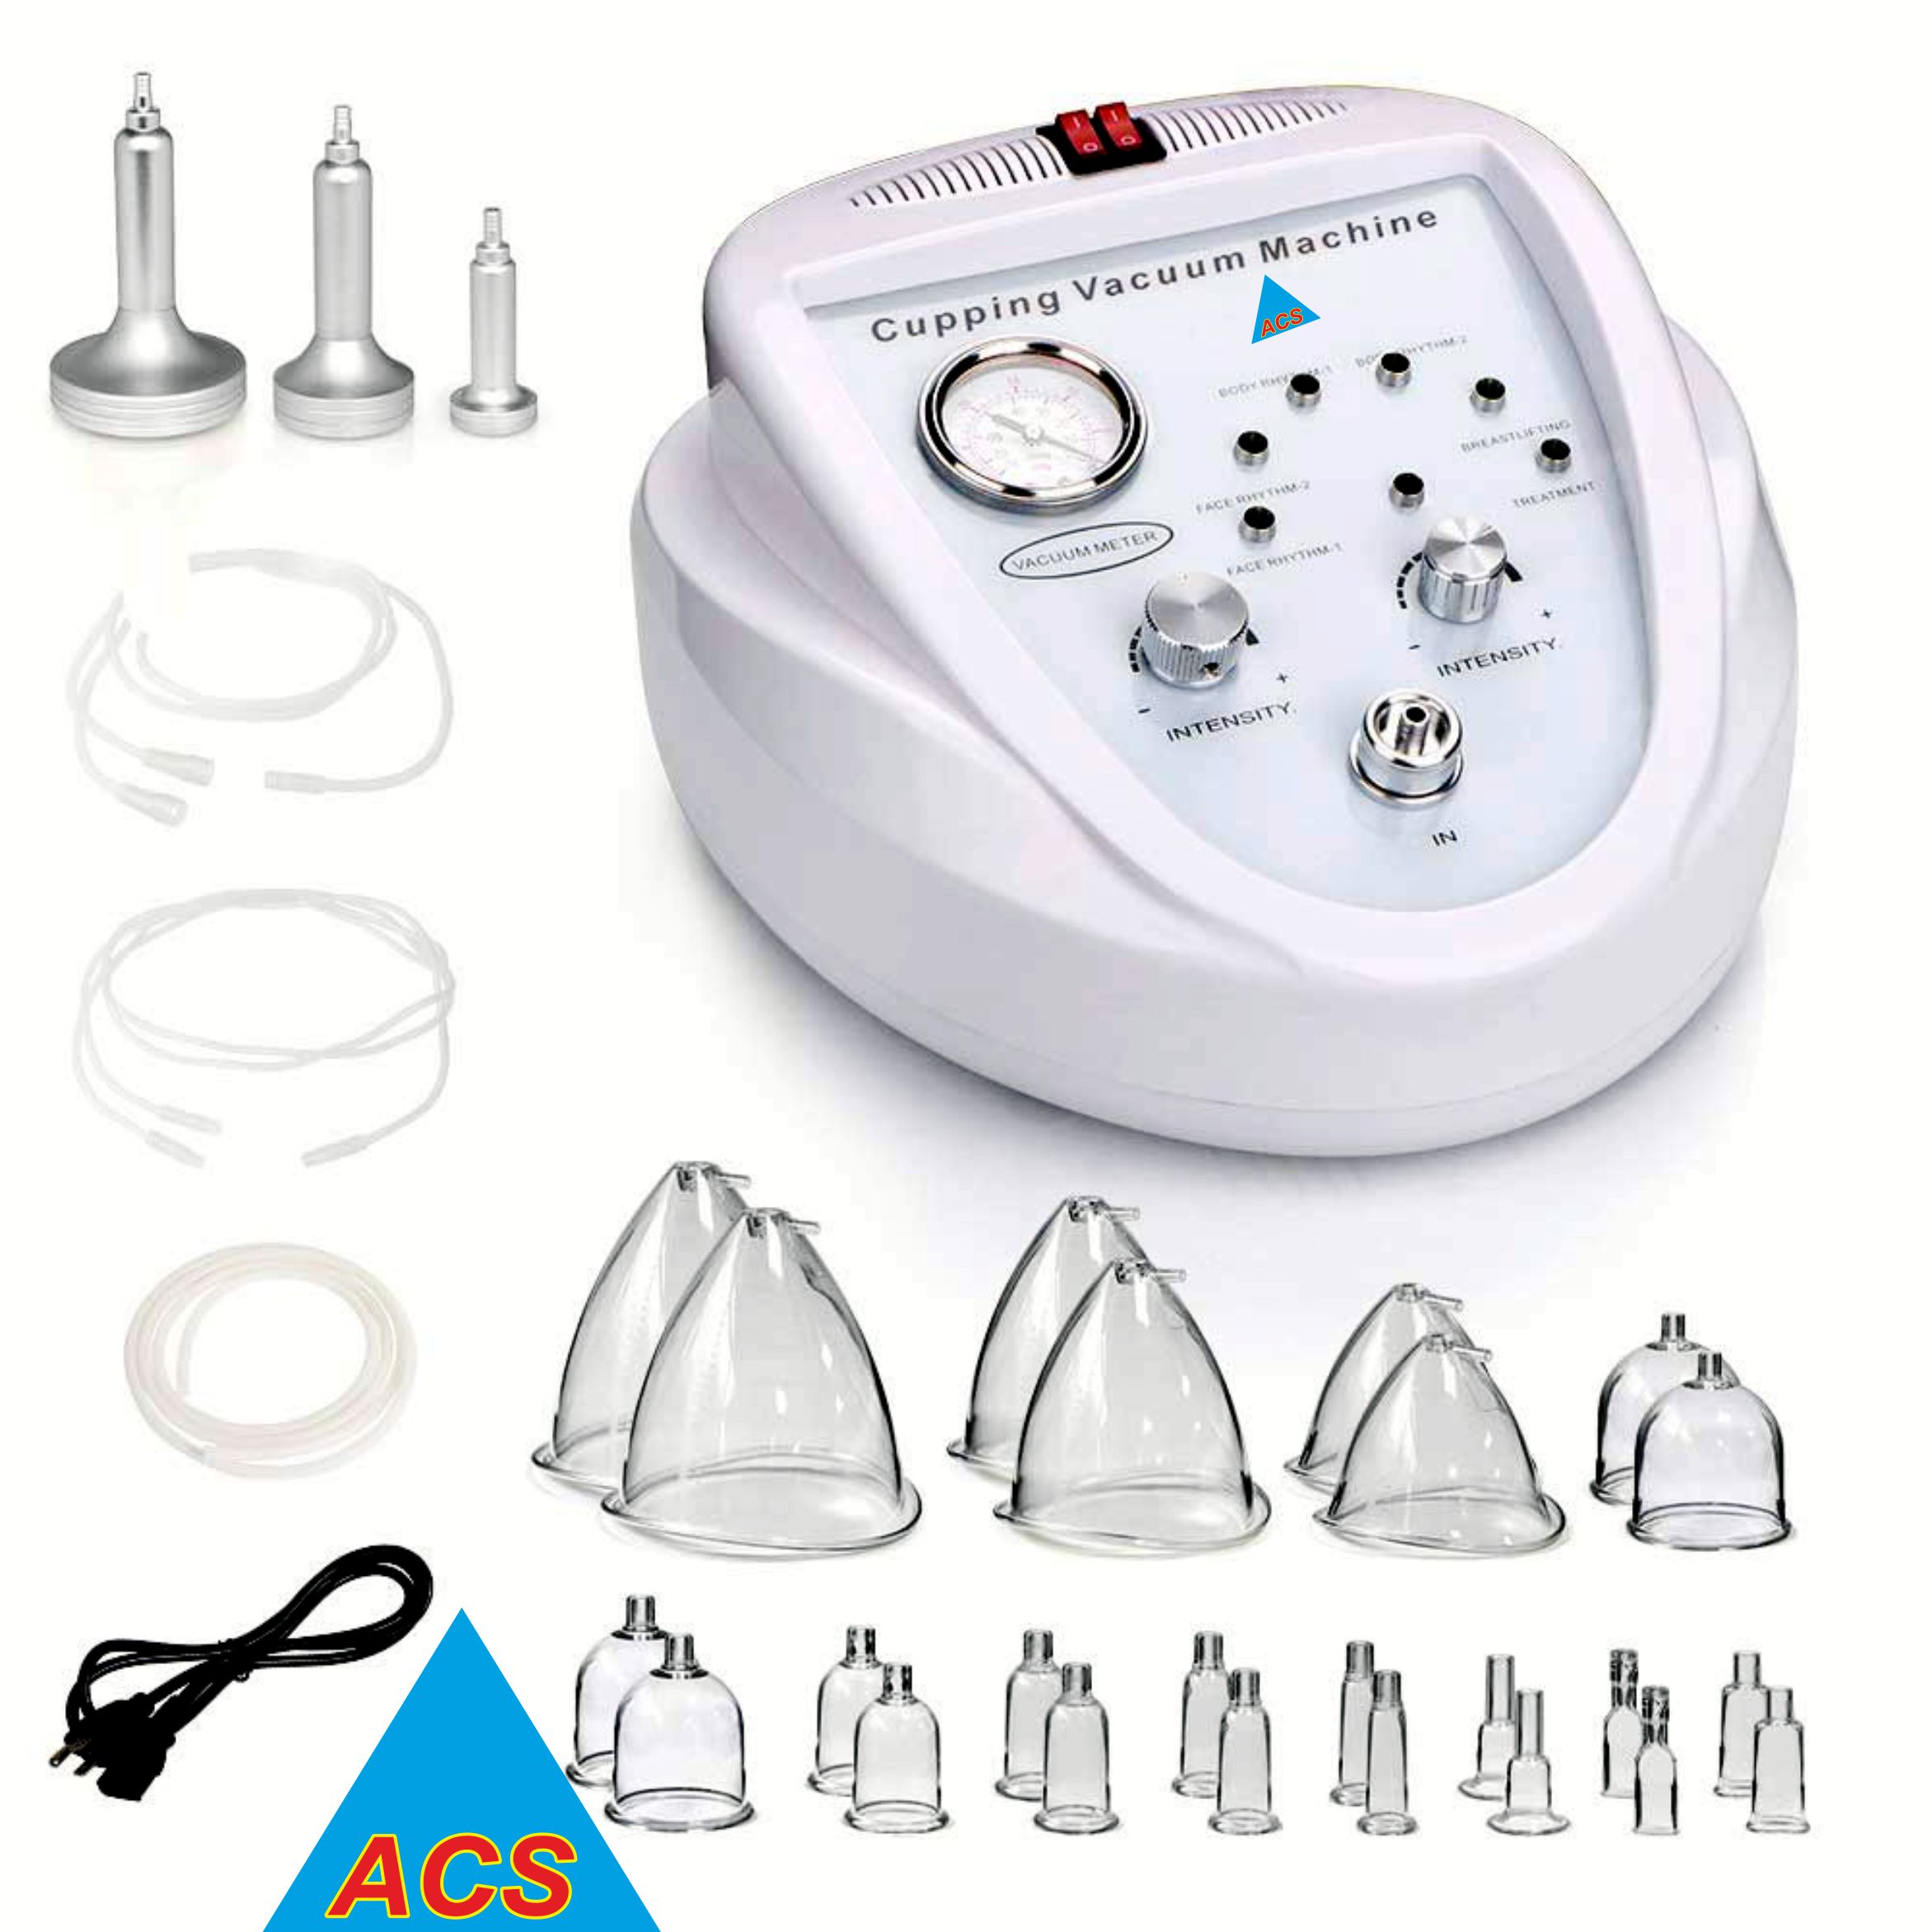 ACS Vaccum Cupping Therapy  - BCI-103 